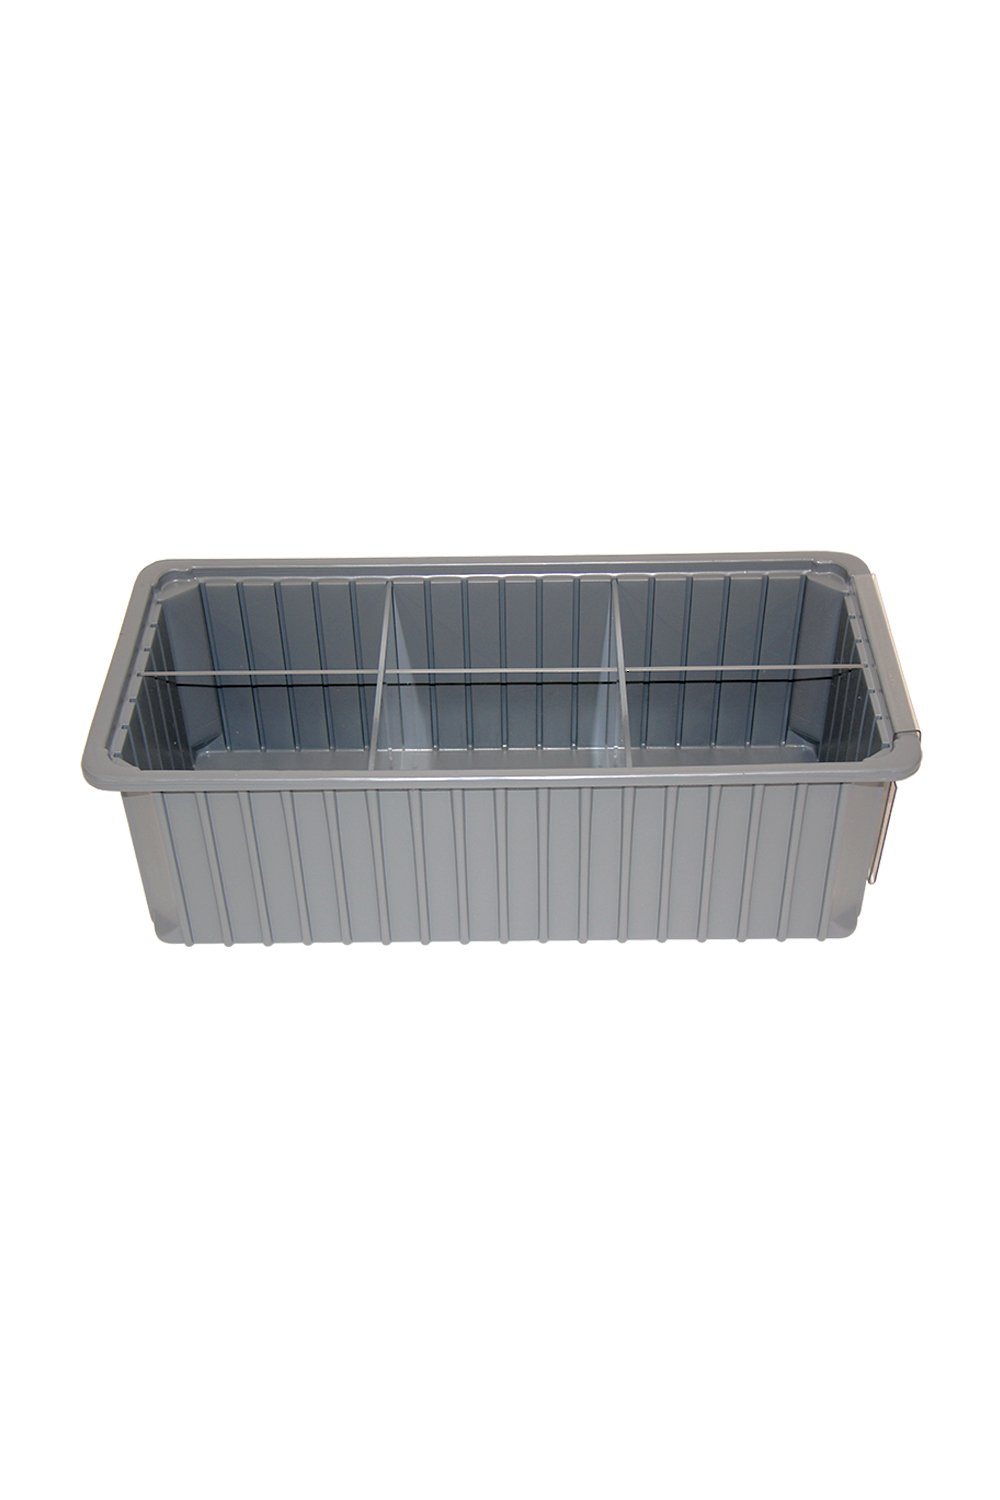 Dividable Tote Accessories Bins & Containers Acart 